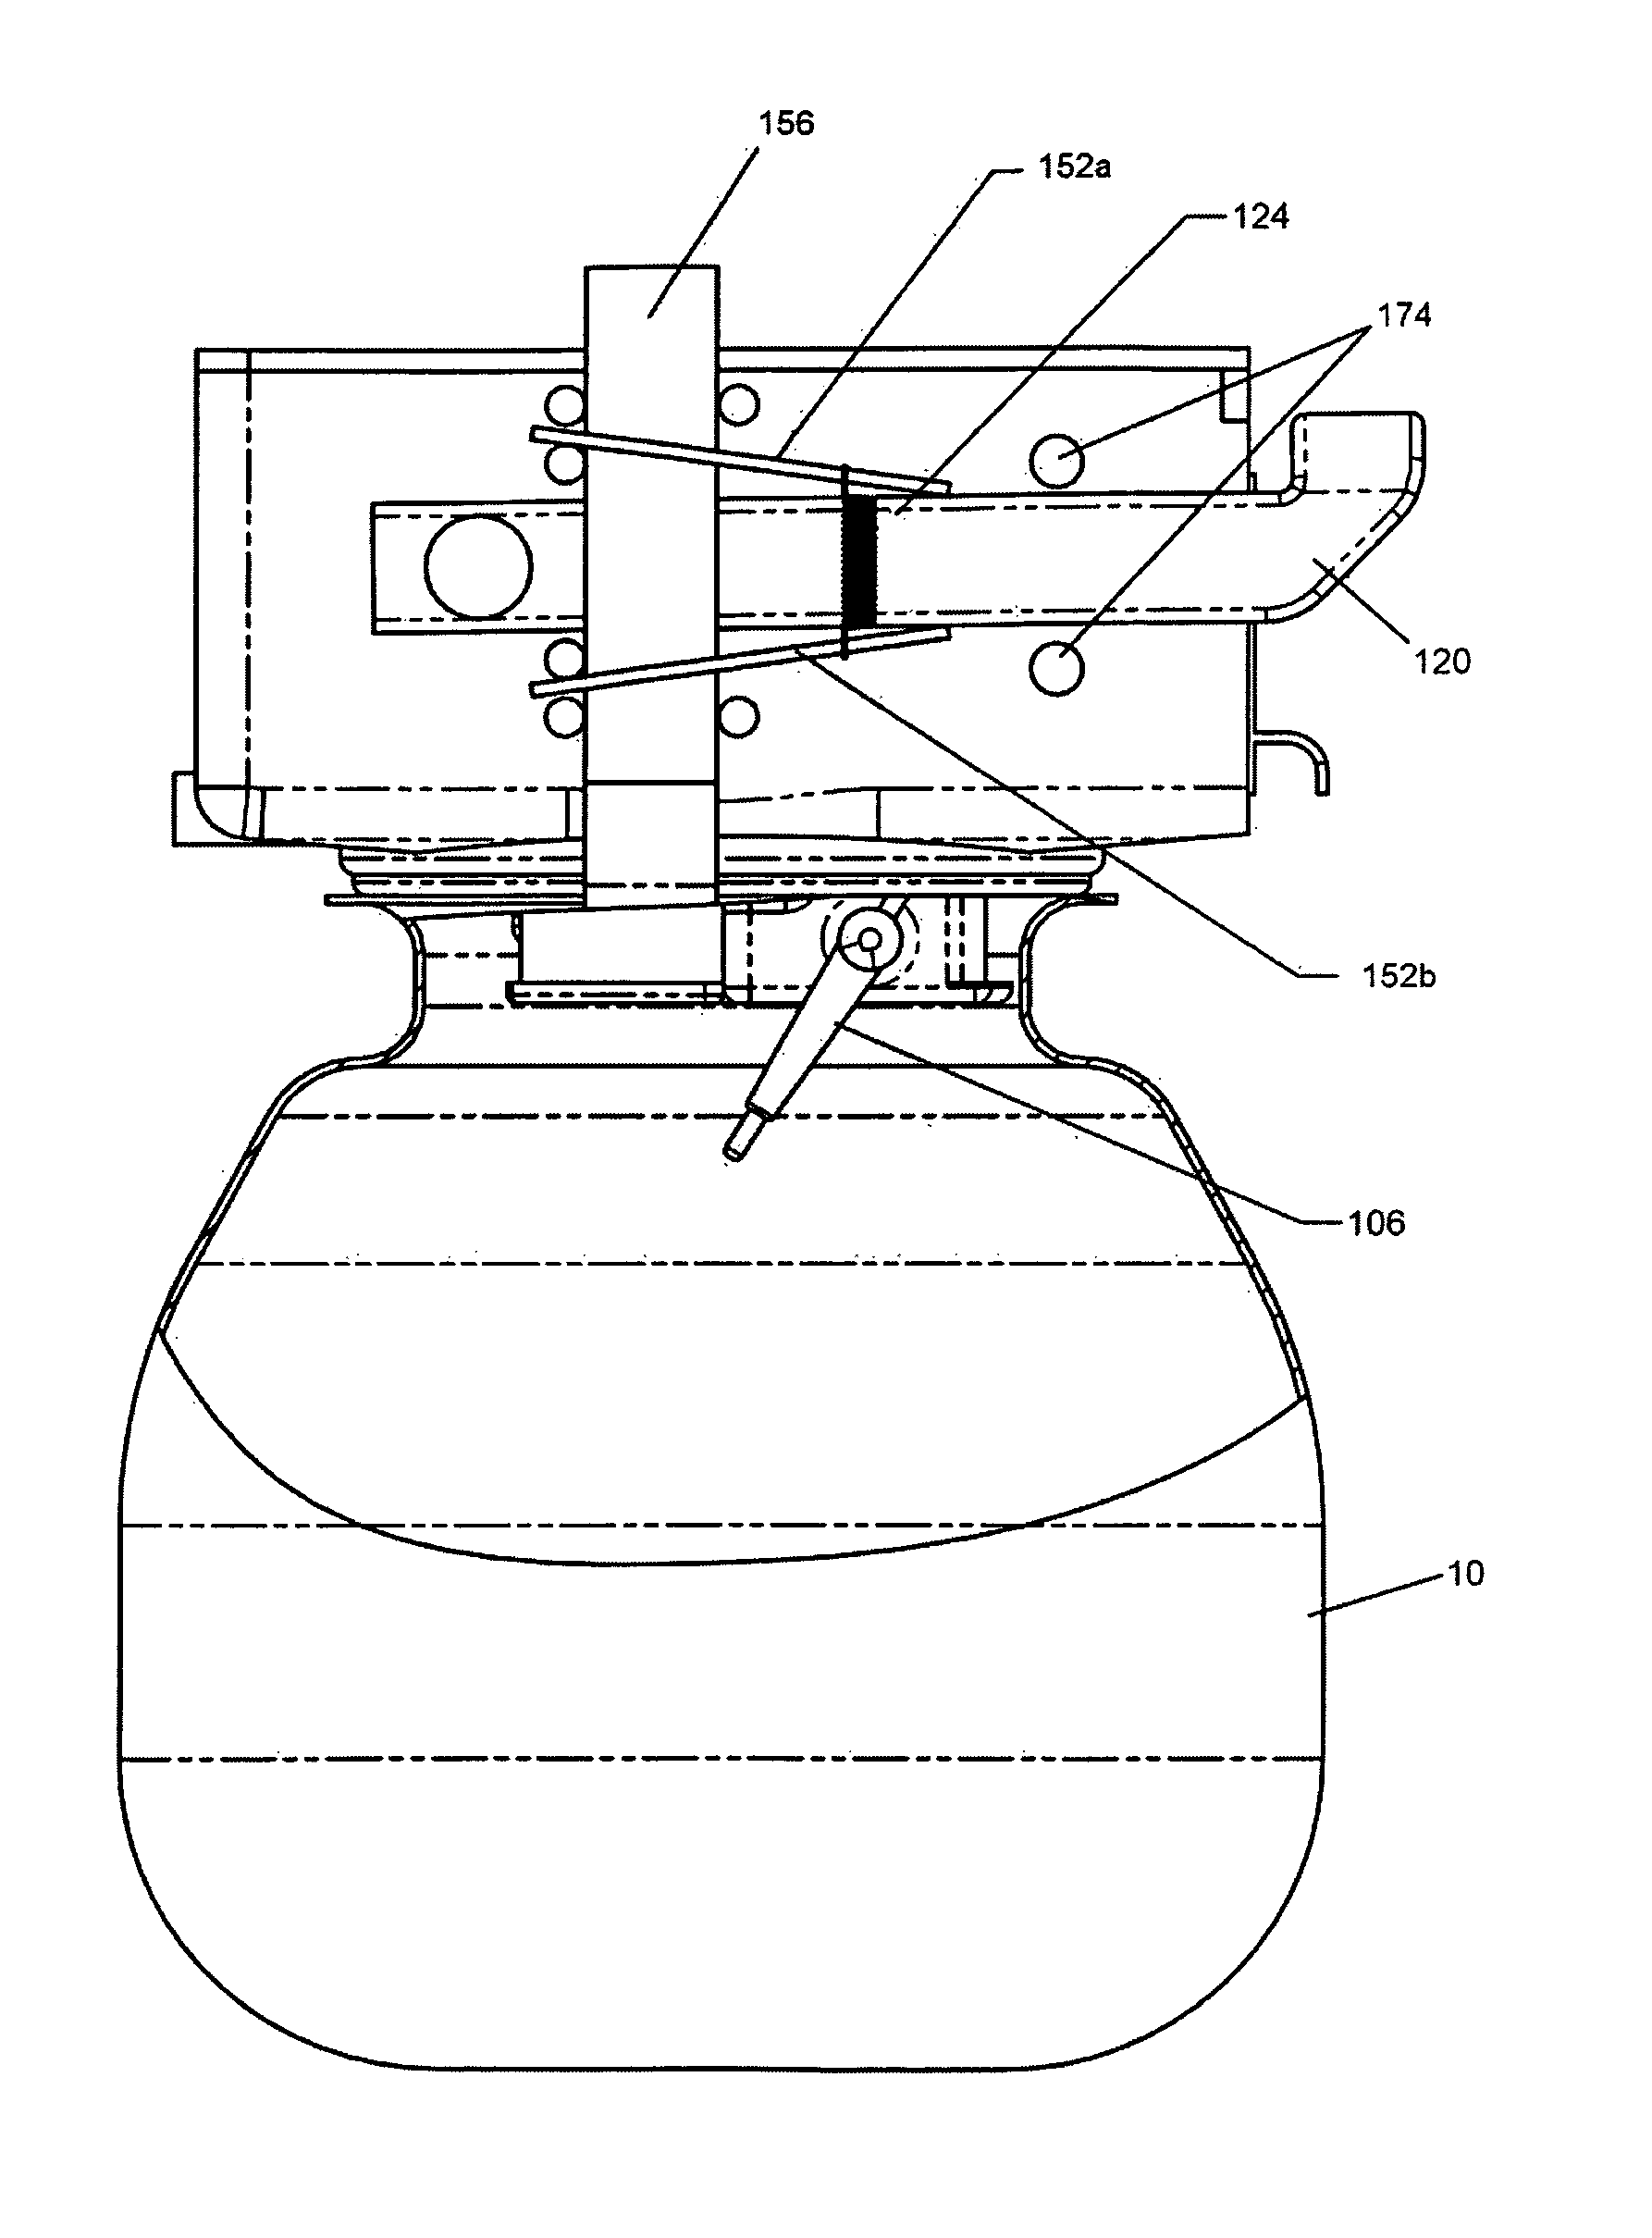 Sensor head and brew cup for a beverage brewing device